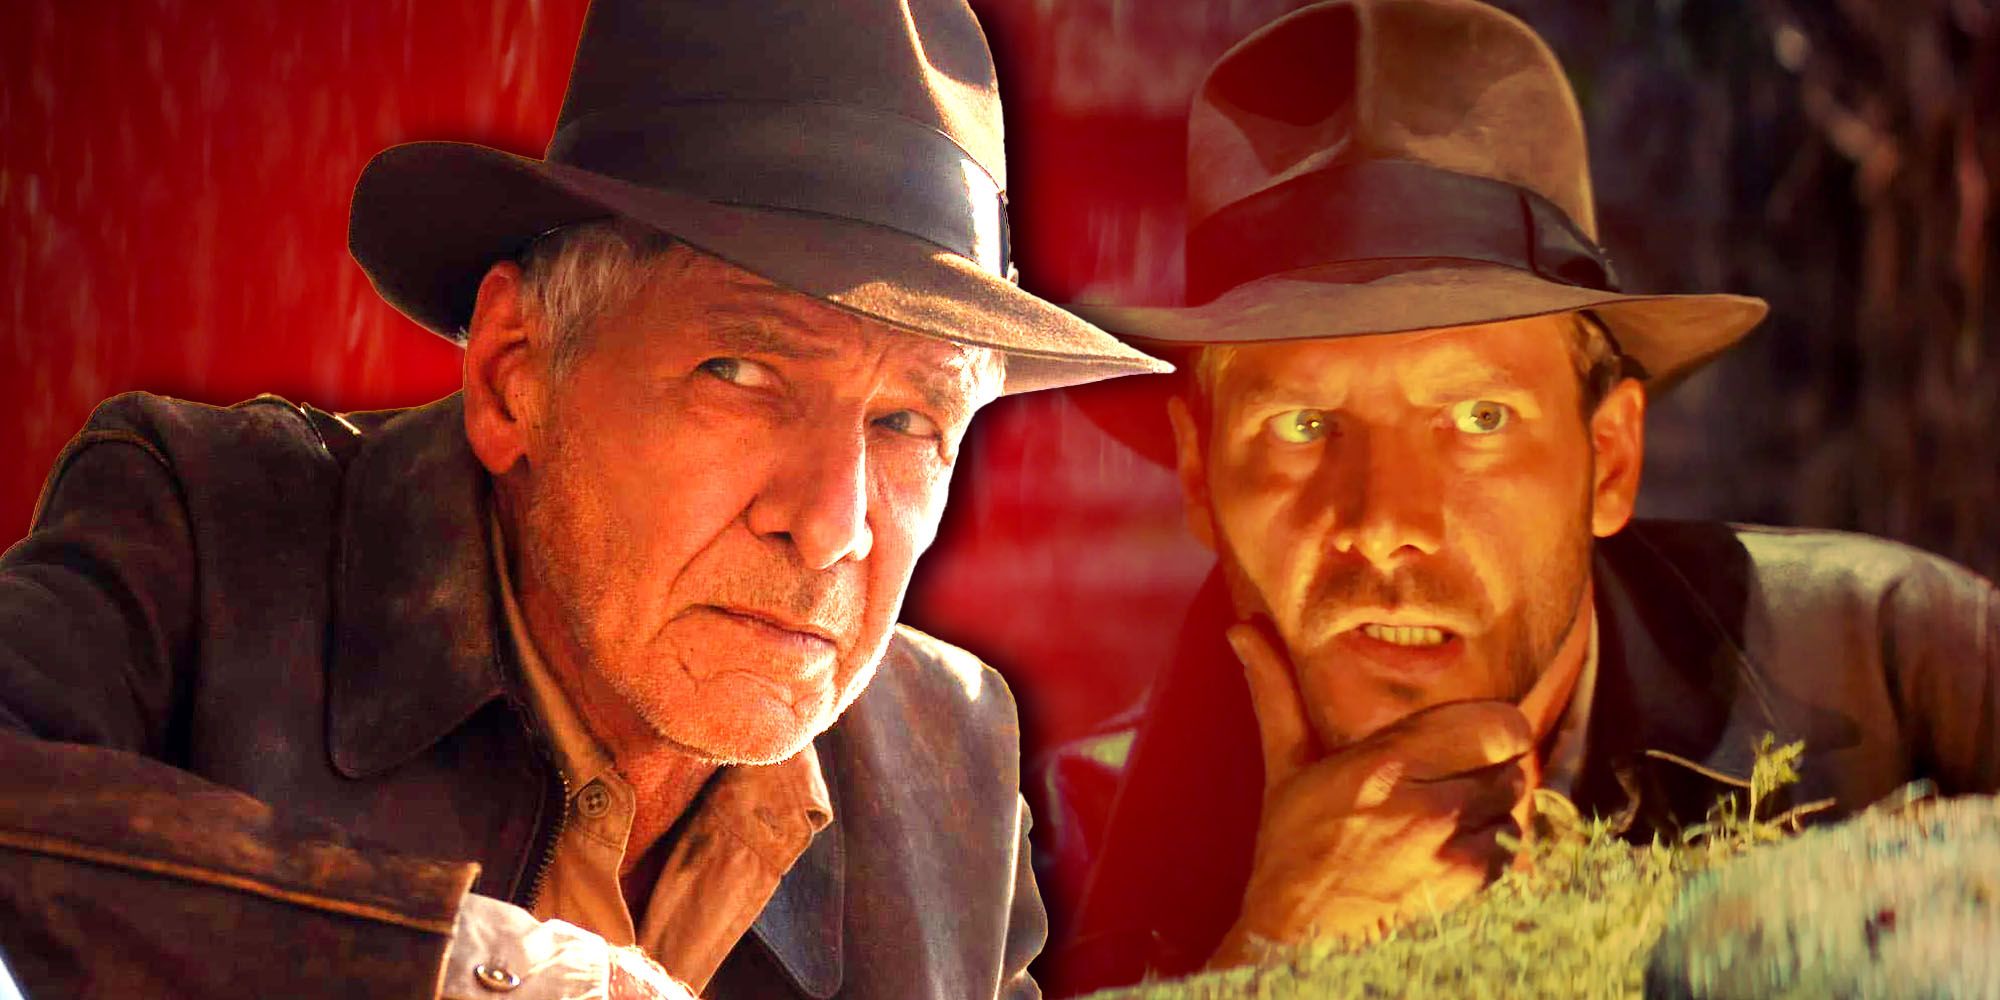 George Lucas And Steven Spielberg's First Vision For Indiana Jones Had  Harrison Ford Asking Questions